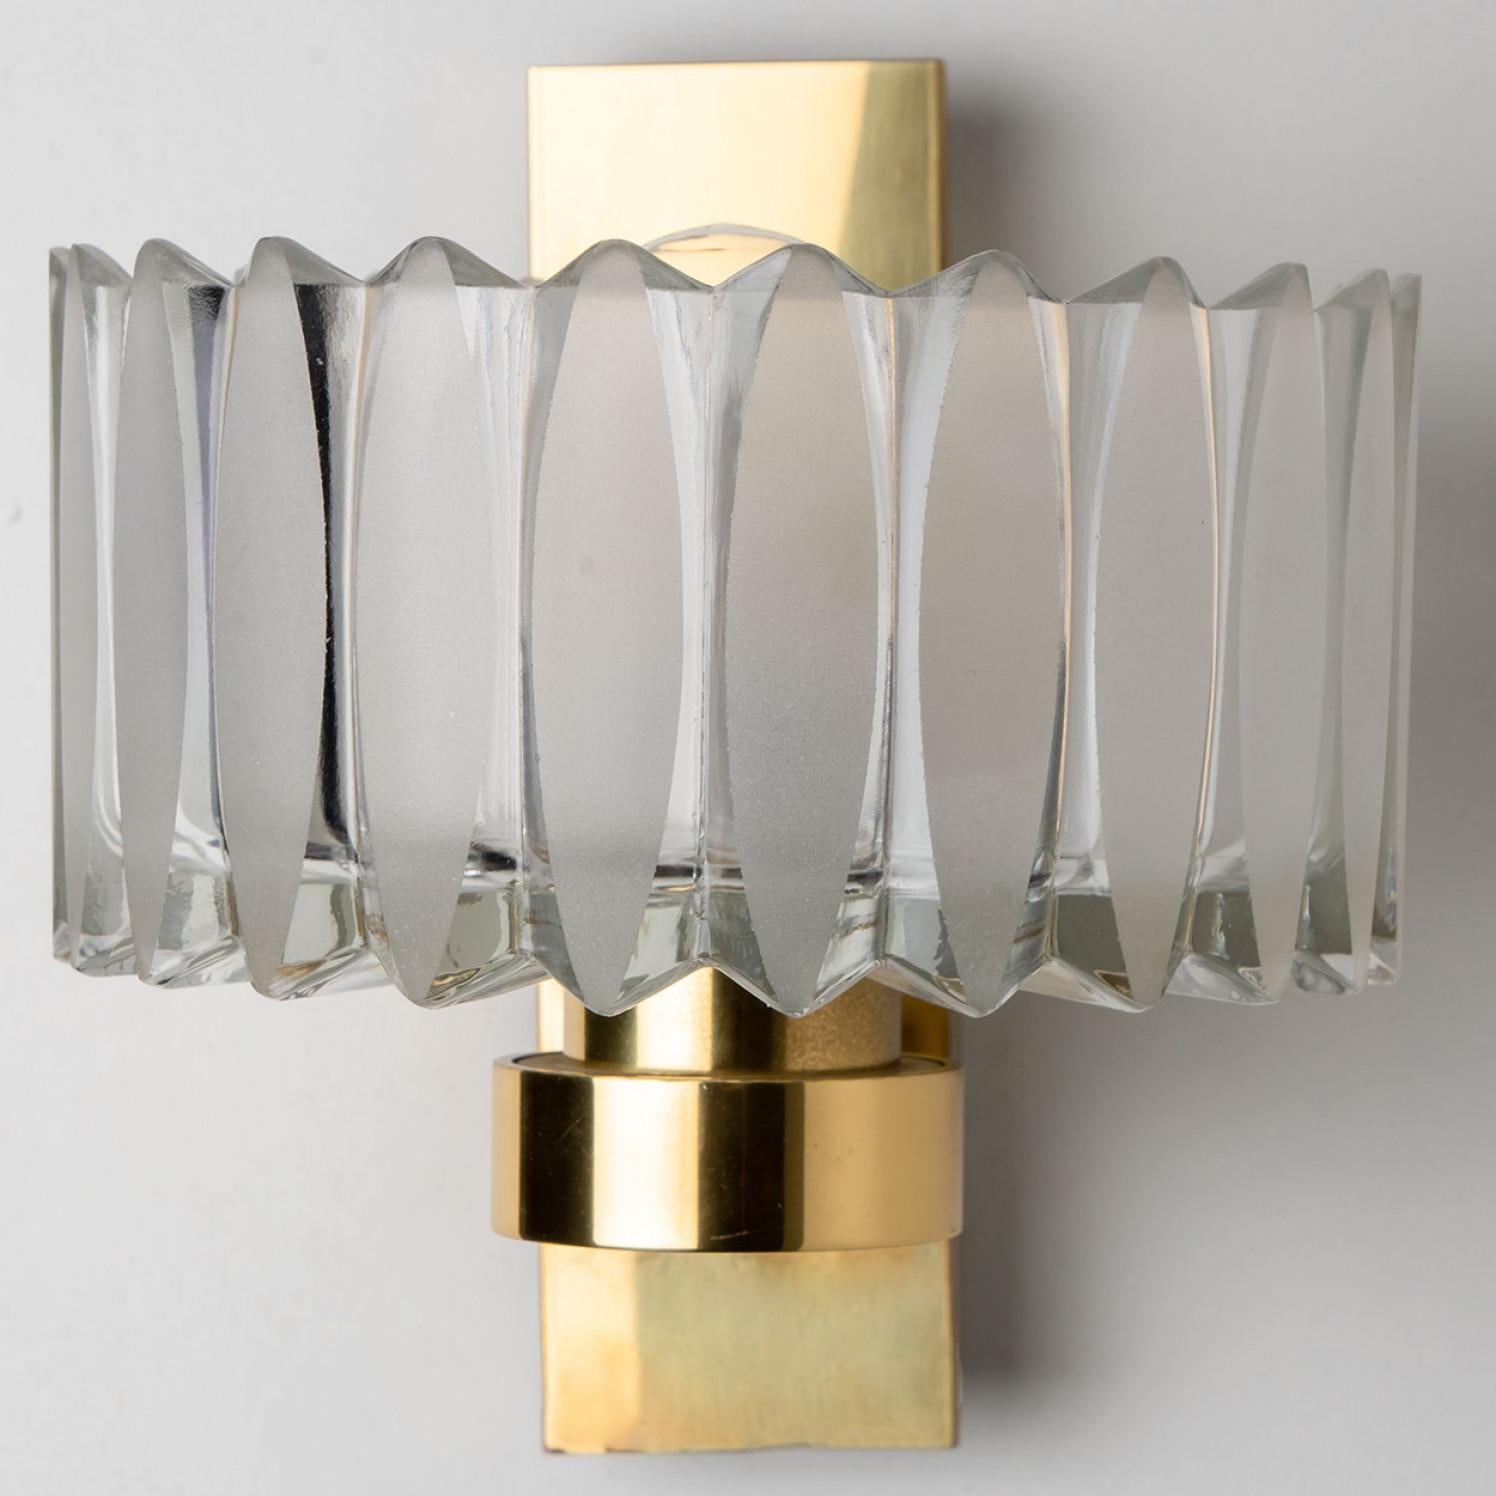 Mid-Century Modern Pair of Hillebrand Brass and Glass Wall Light Fixtures, 1970s For Sale